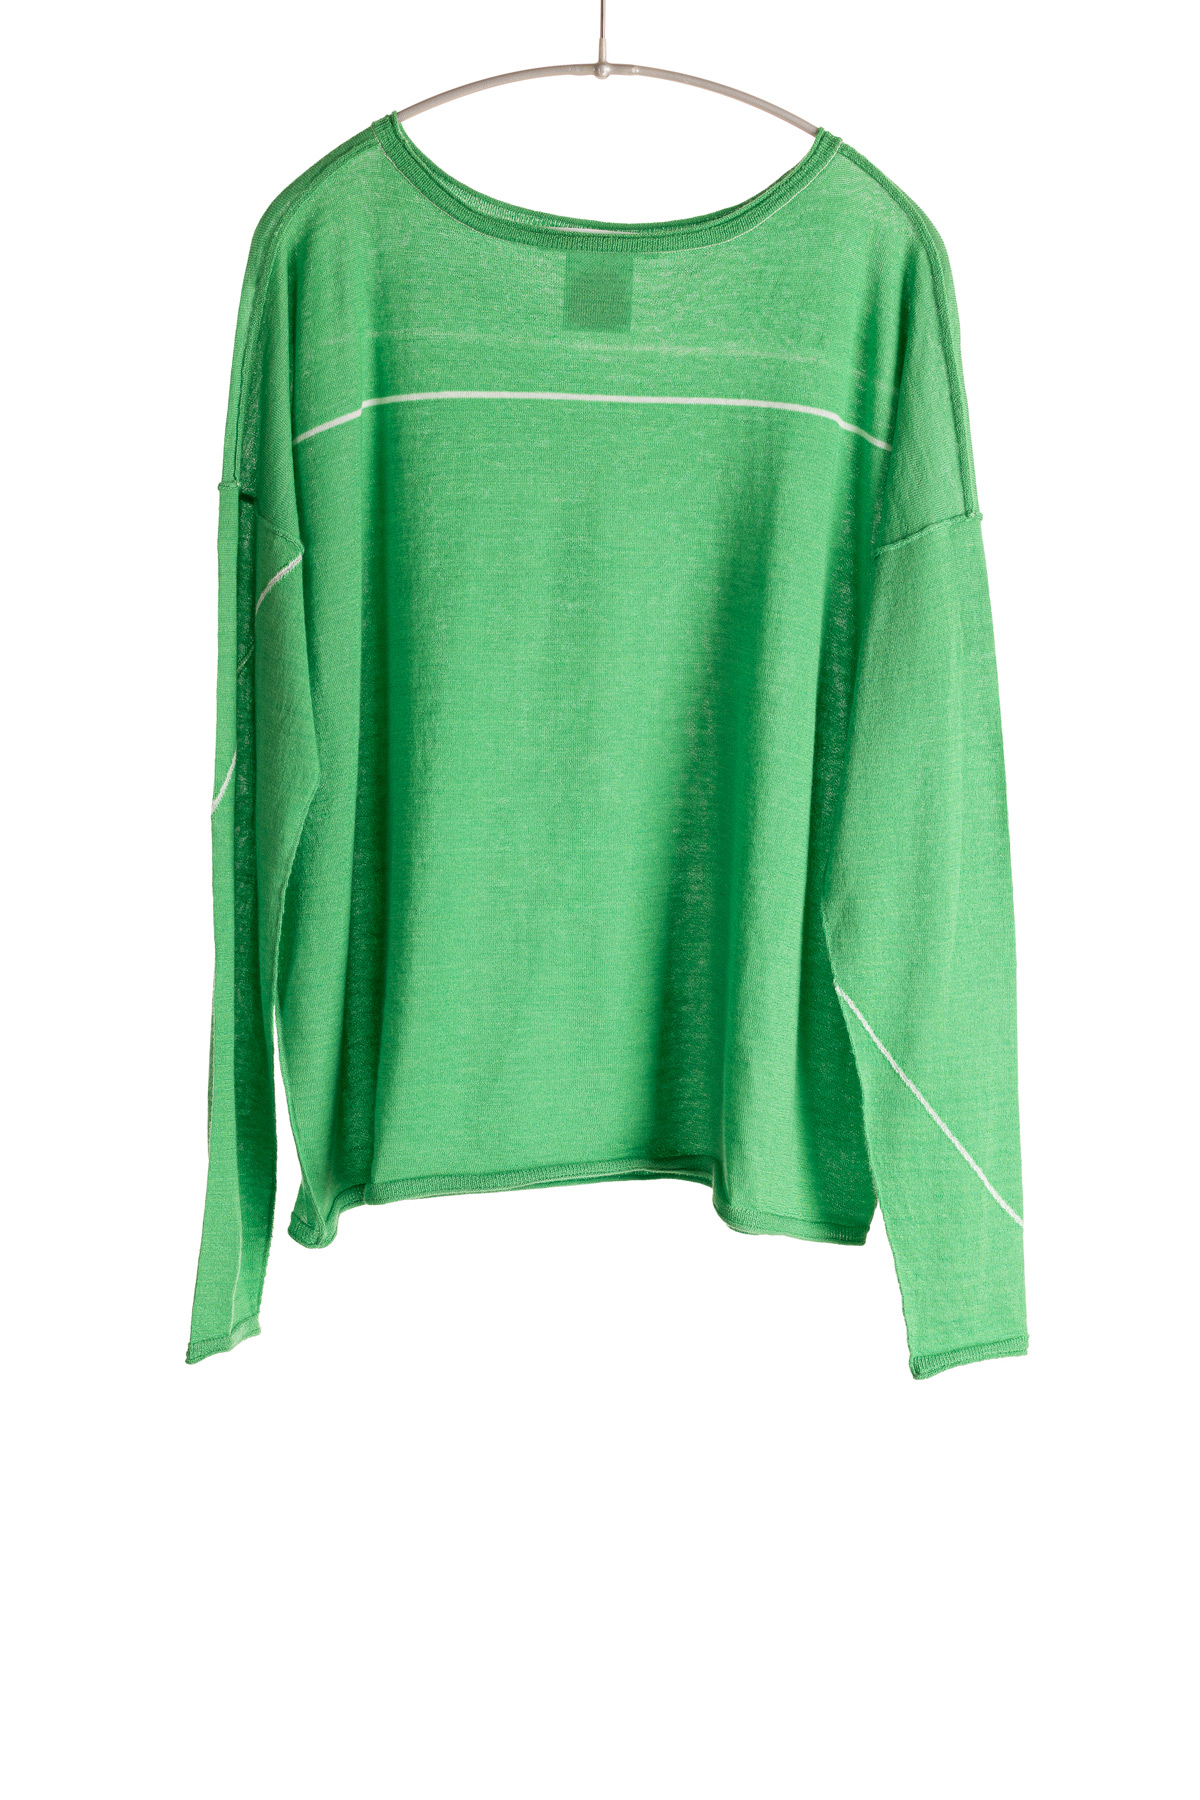 S407_BateauPullover_KellyGreen_H1Front